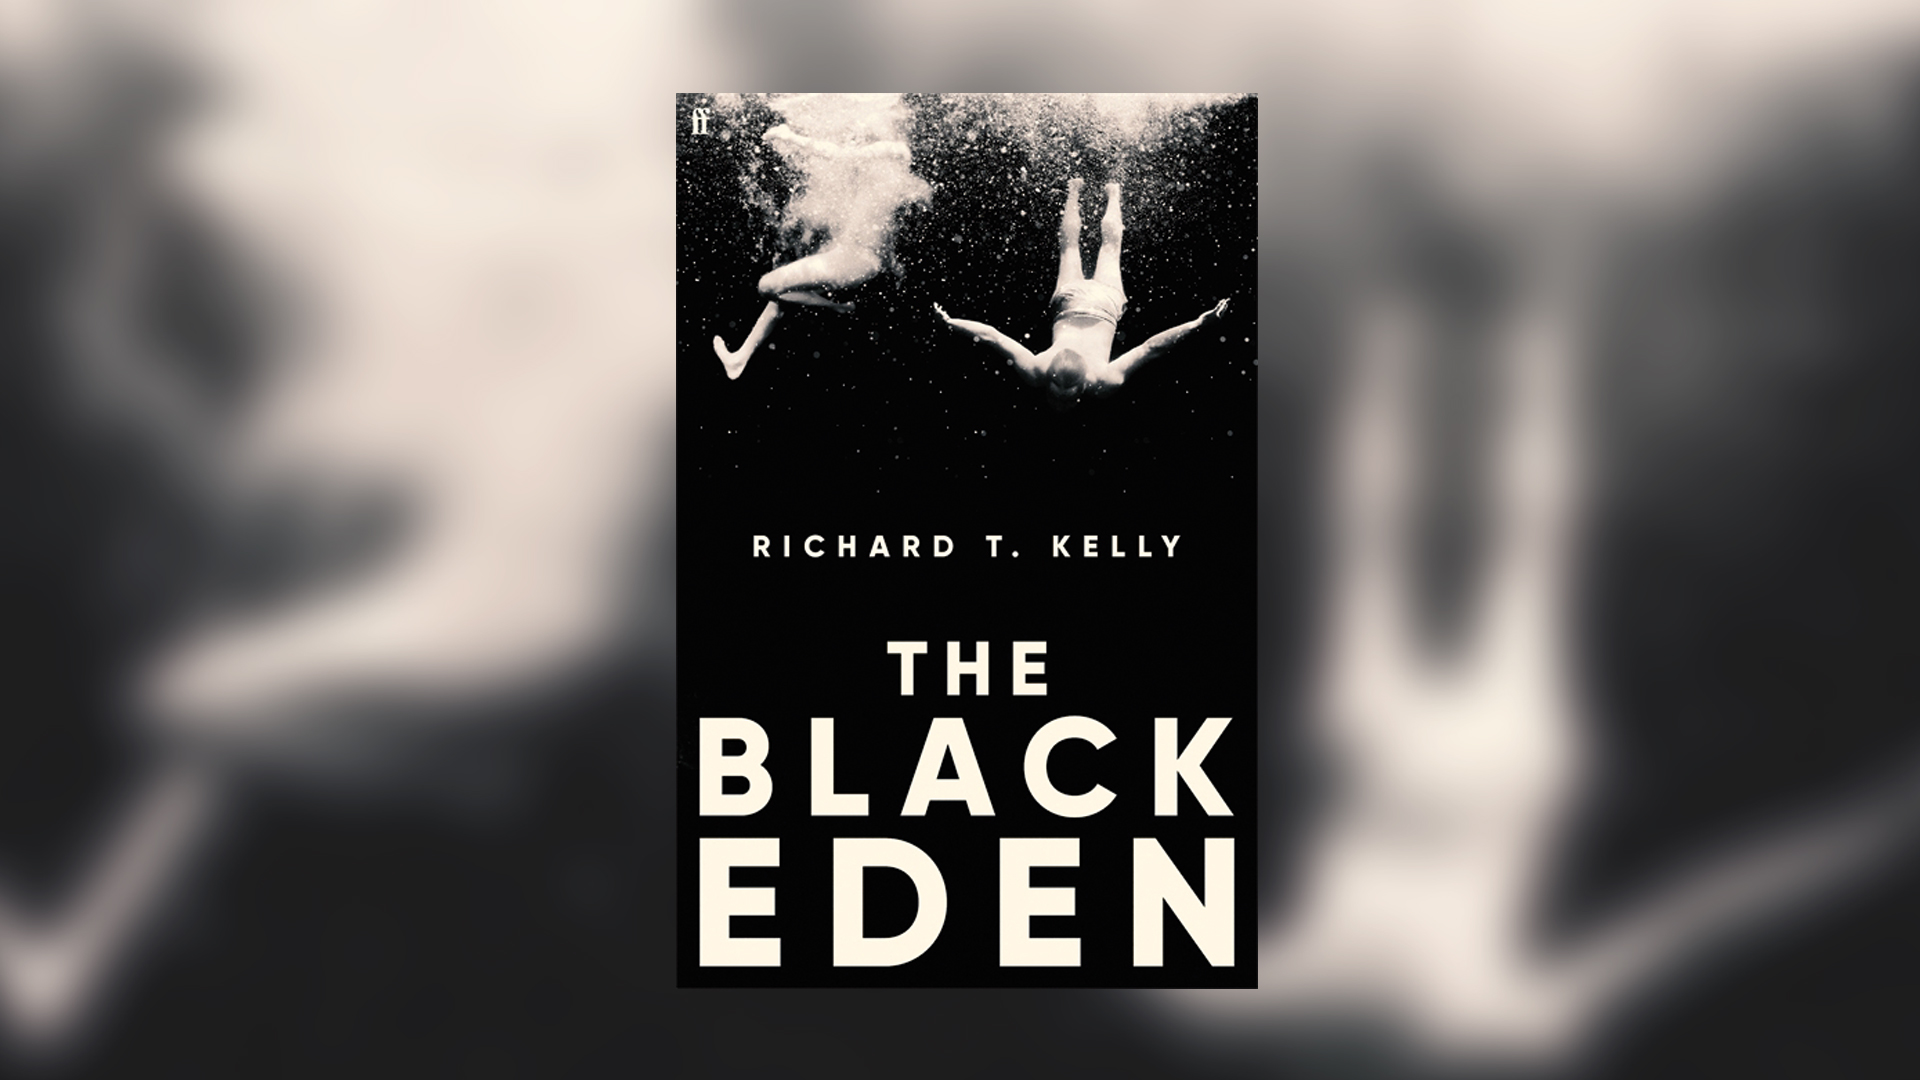 The Black Eden by Richard T Kelly book cover